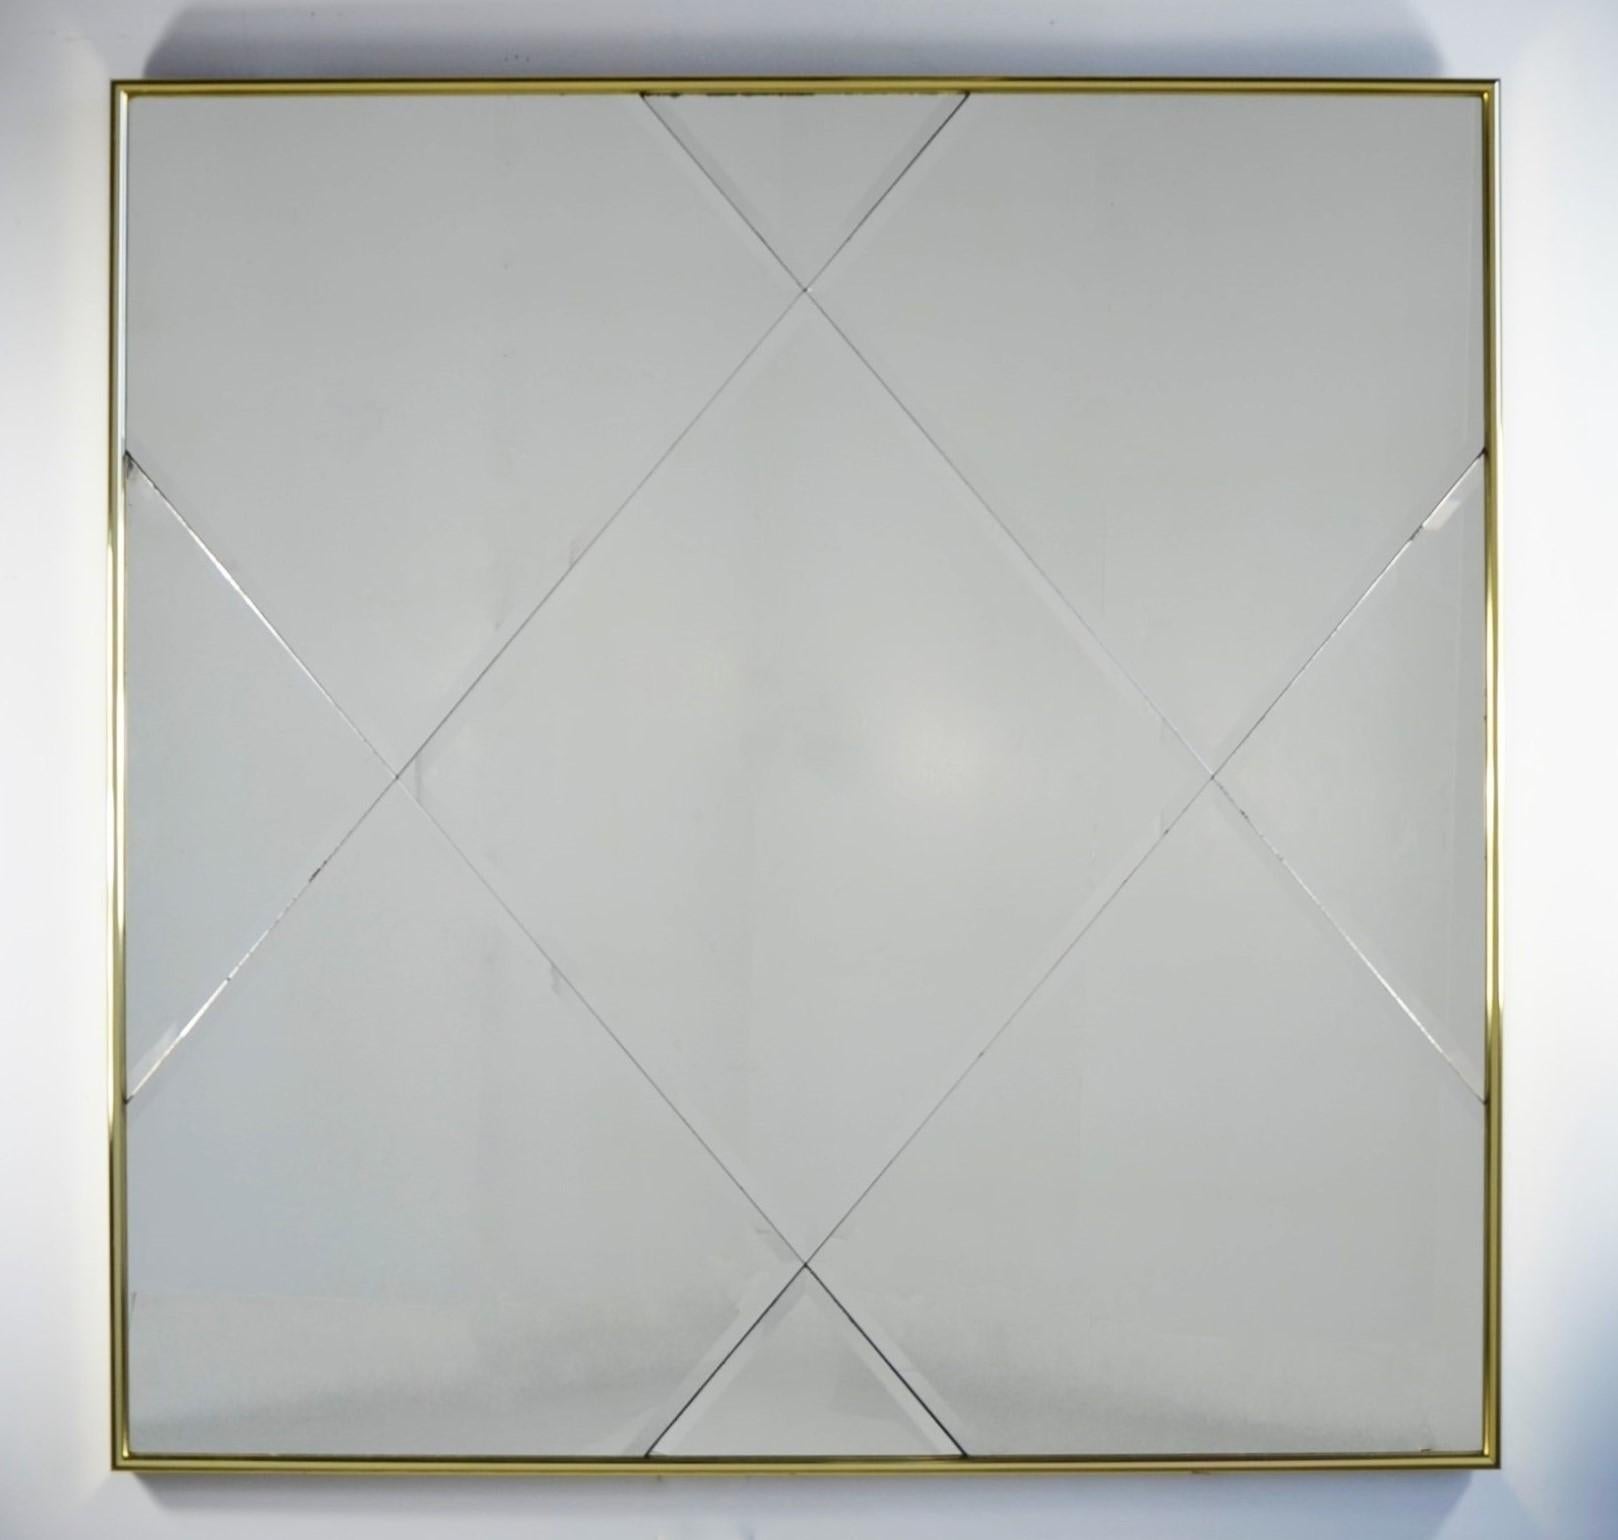 Offered is a Mid-Century Modern brass frame and harlequin pattern beveled glass wall mirror. This beautiful brass harlequin pattern beveled glass wall mirror is an exquisite example Mid-Century Modern decorative wall art. This mirror, with its high